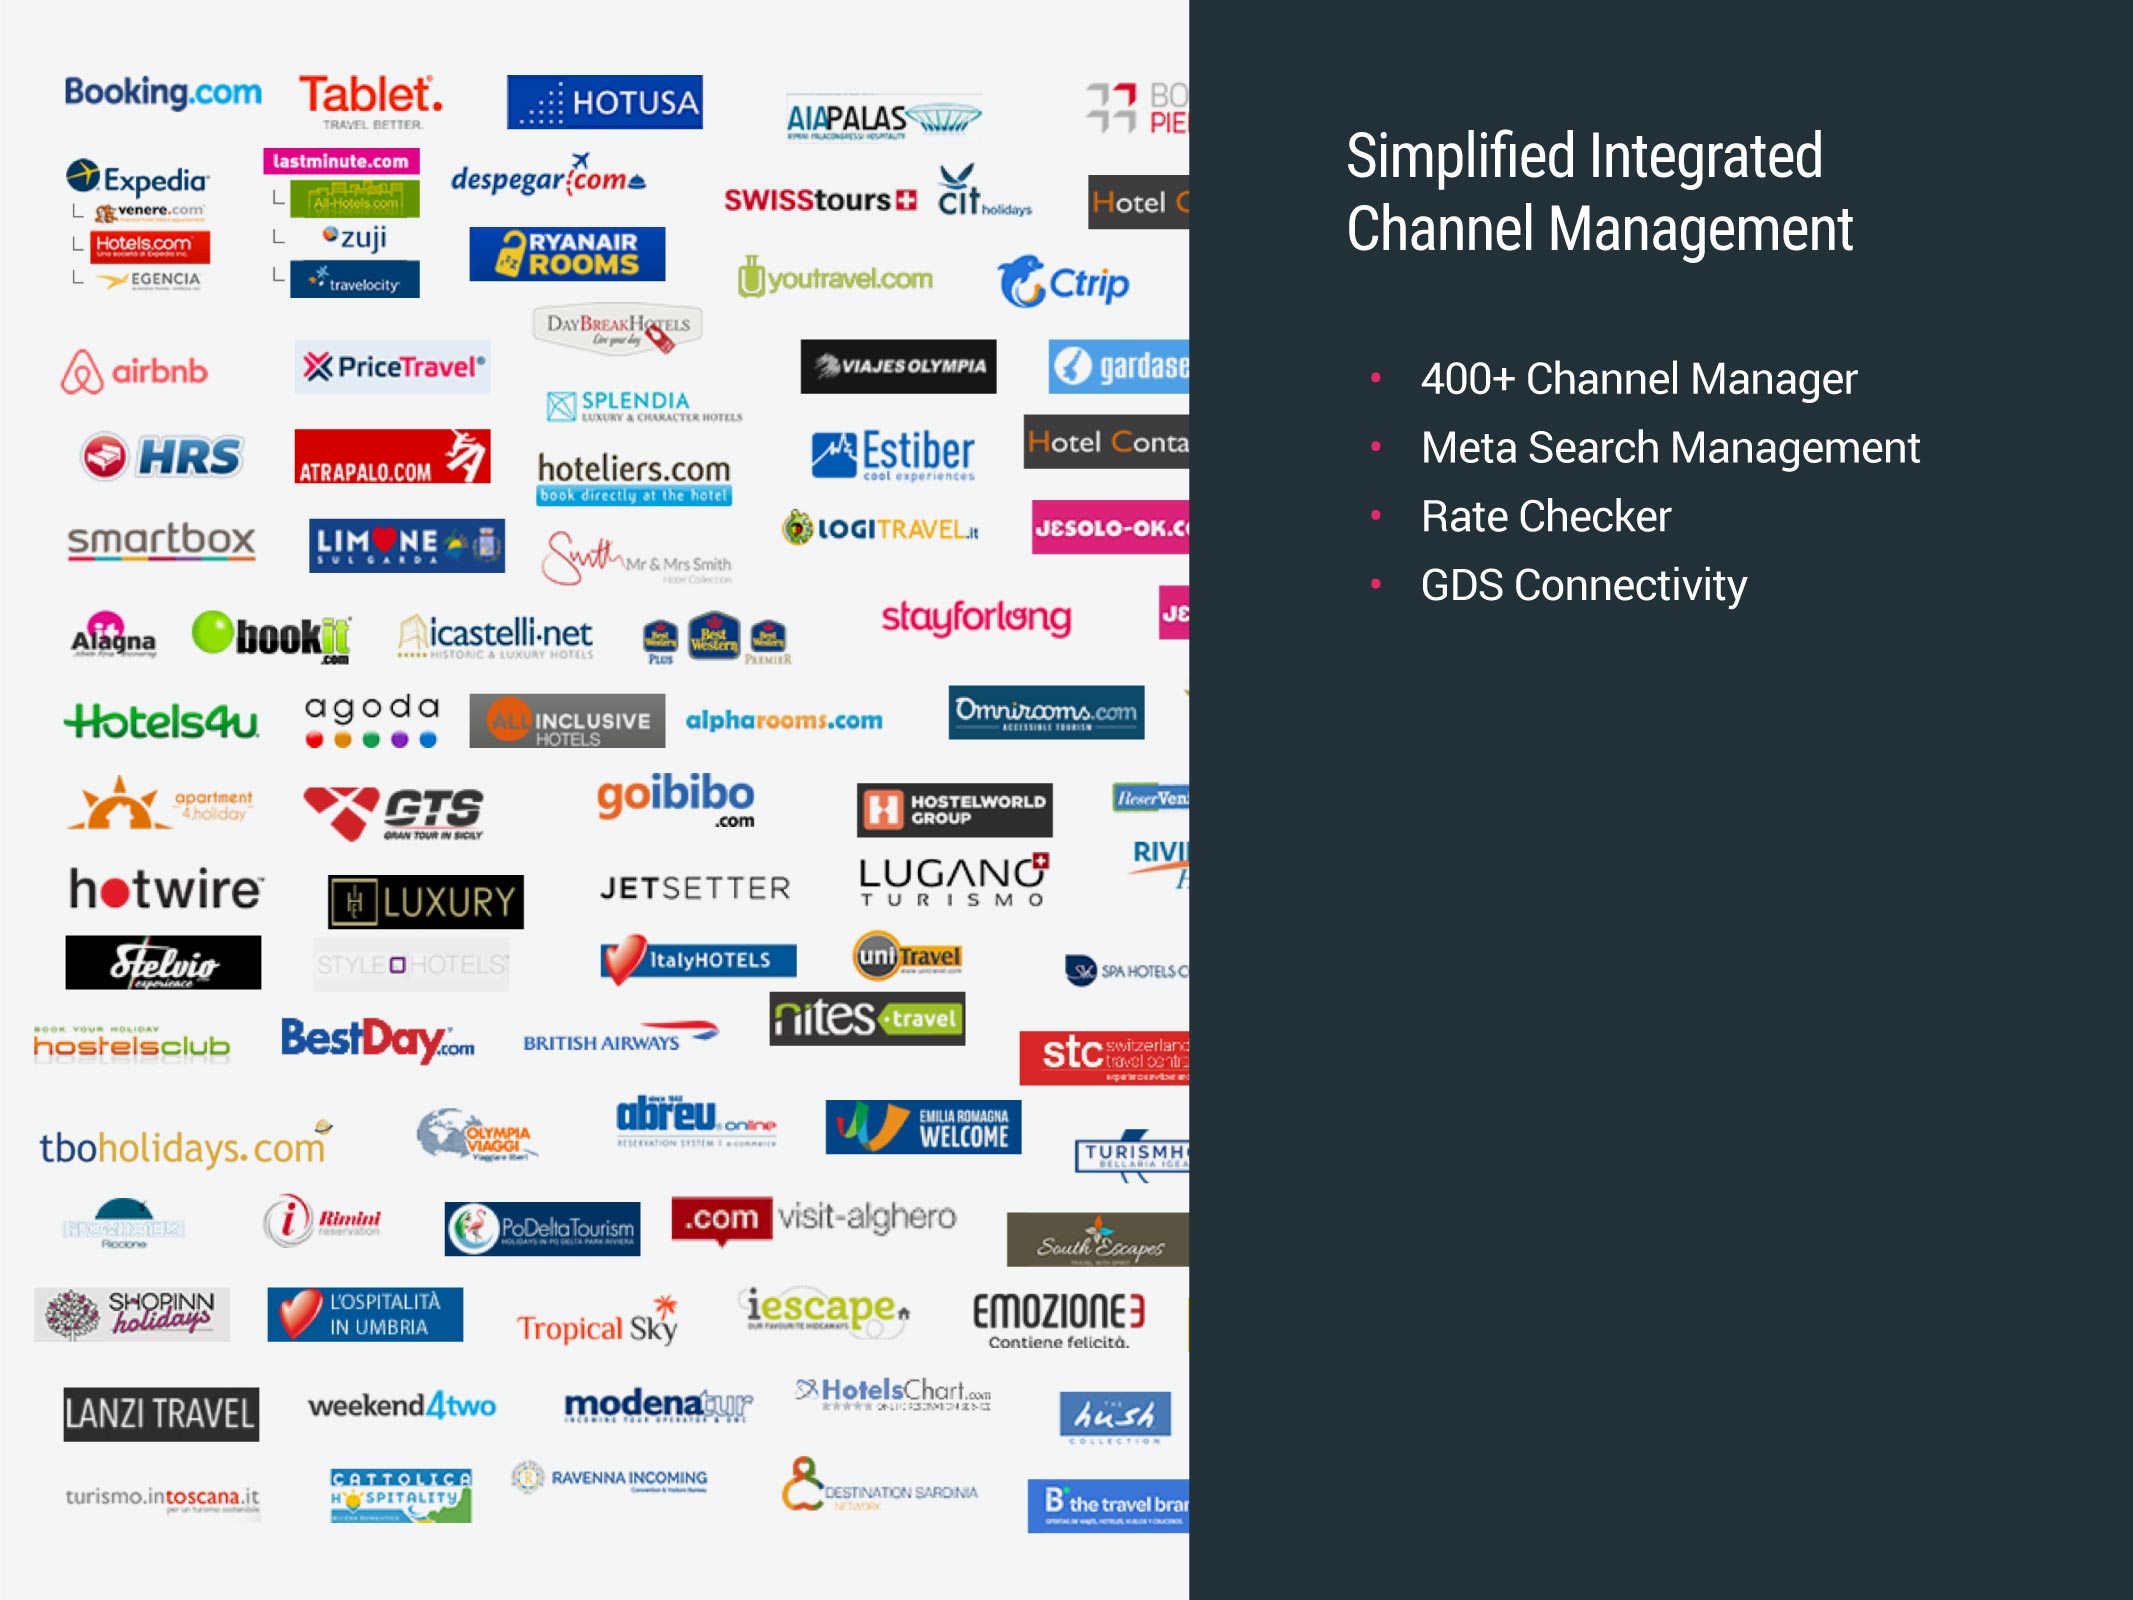 Simplified Integrated Channel Management